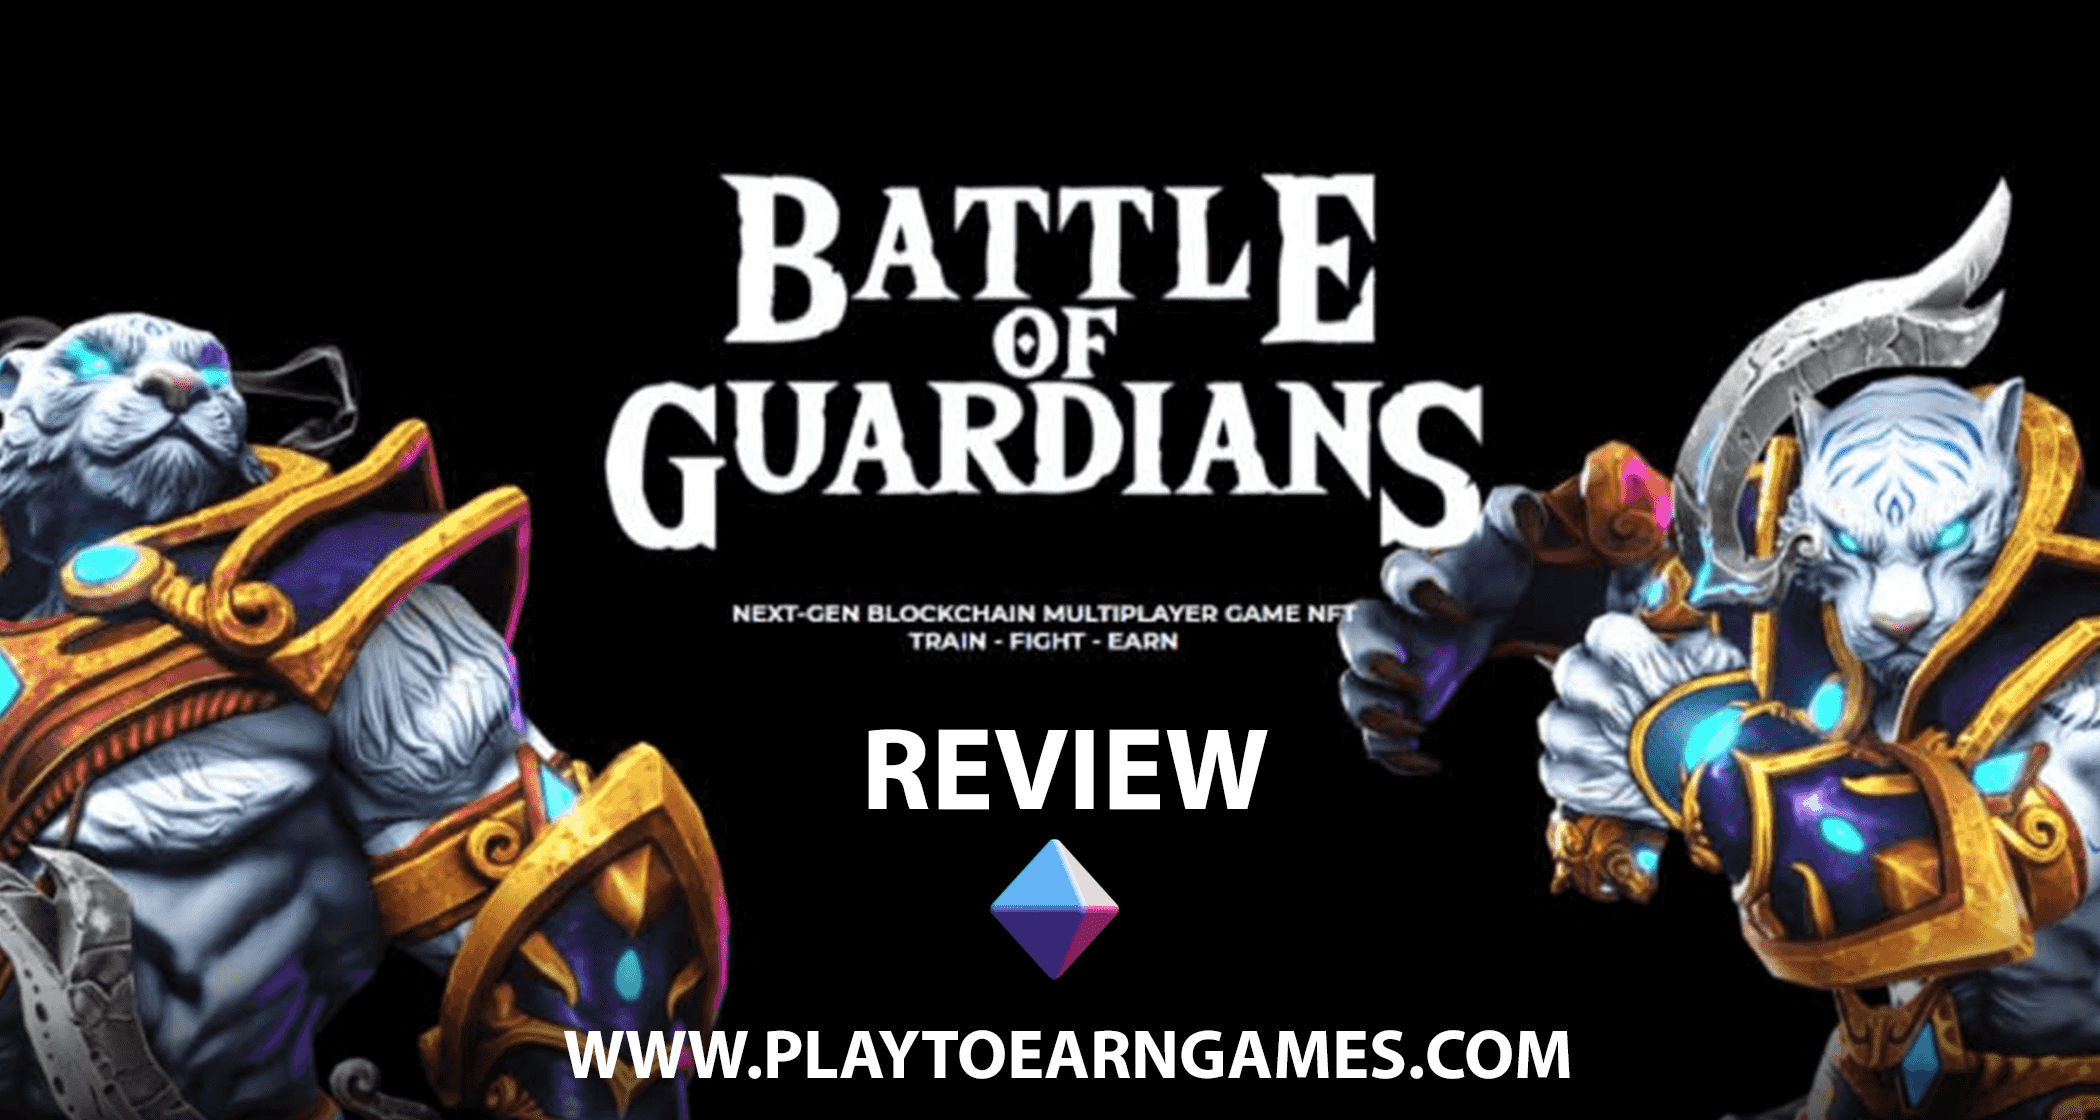 Battle of Guardians - Video Game Review